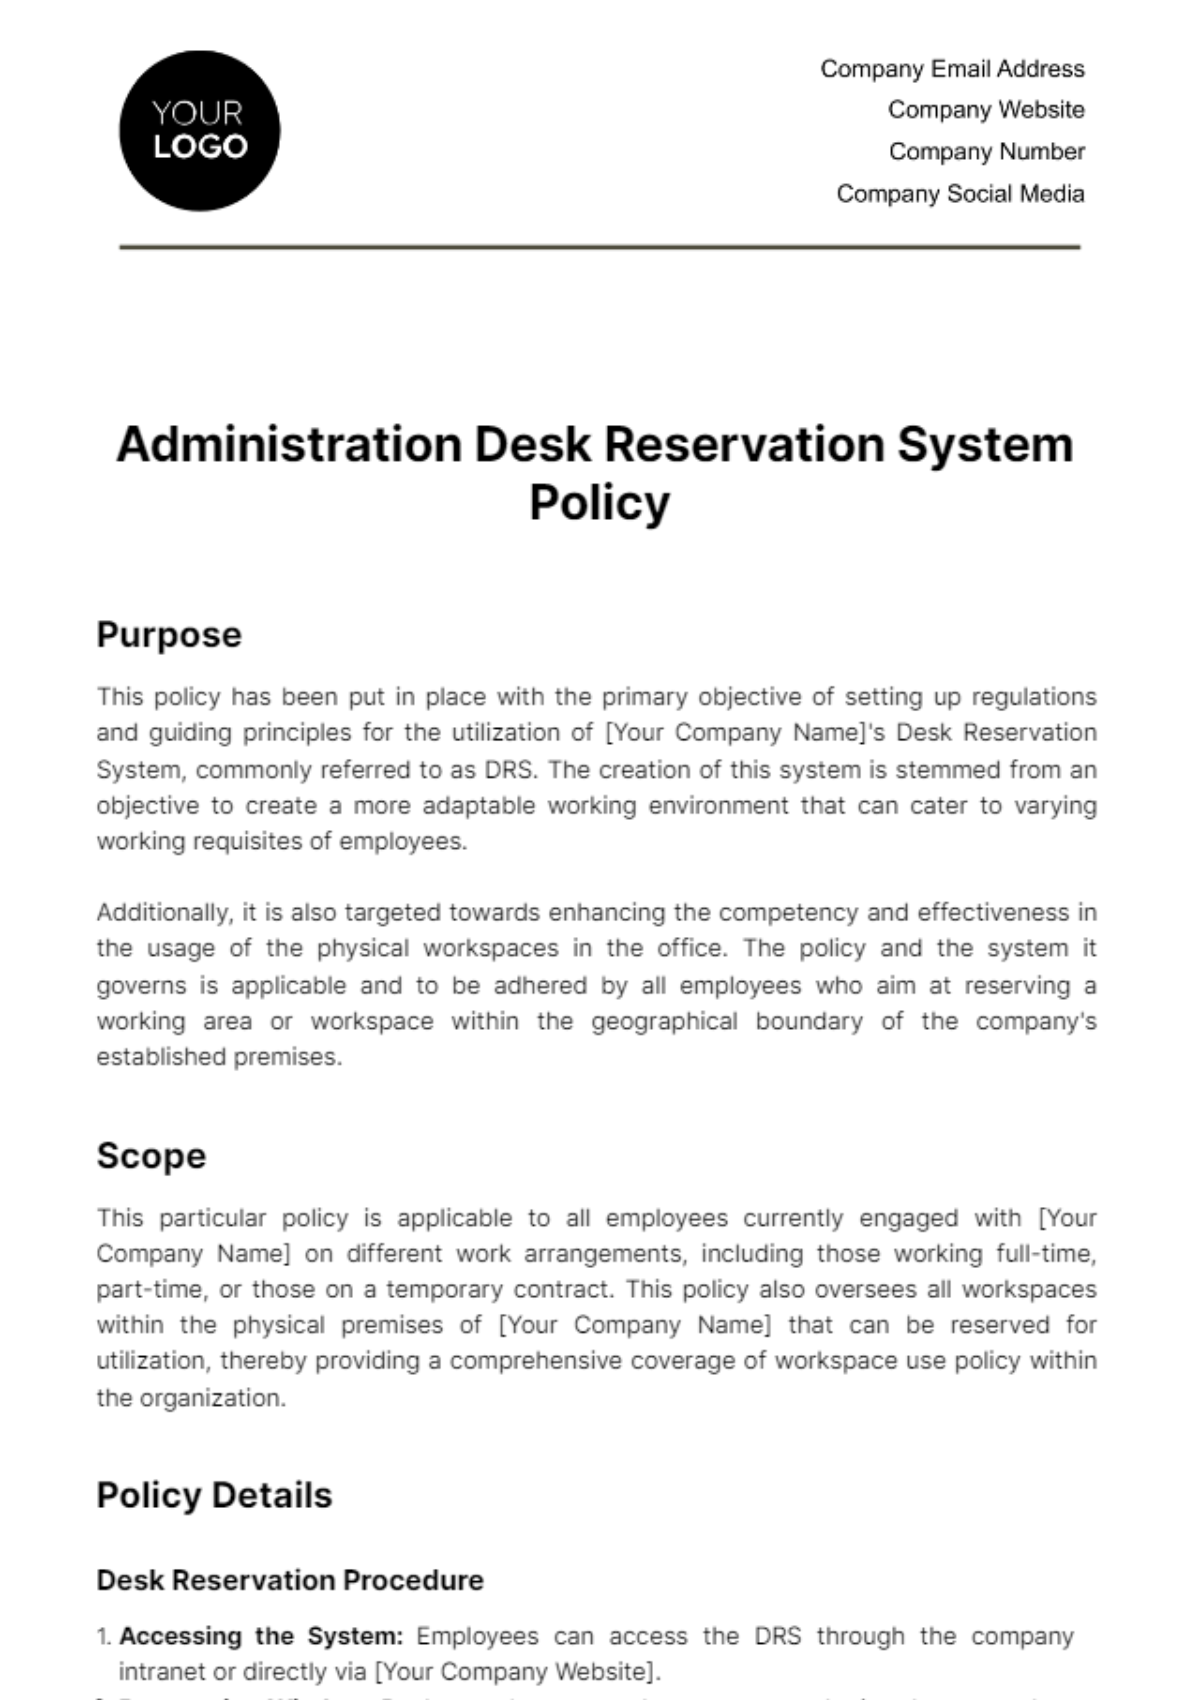 Administration Desk Reservation System Policy Template